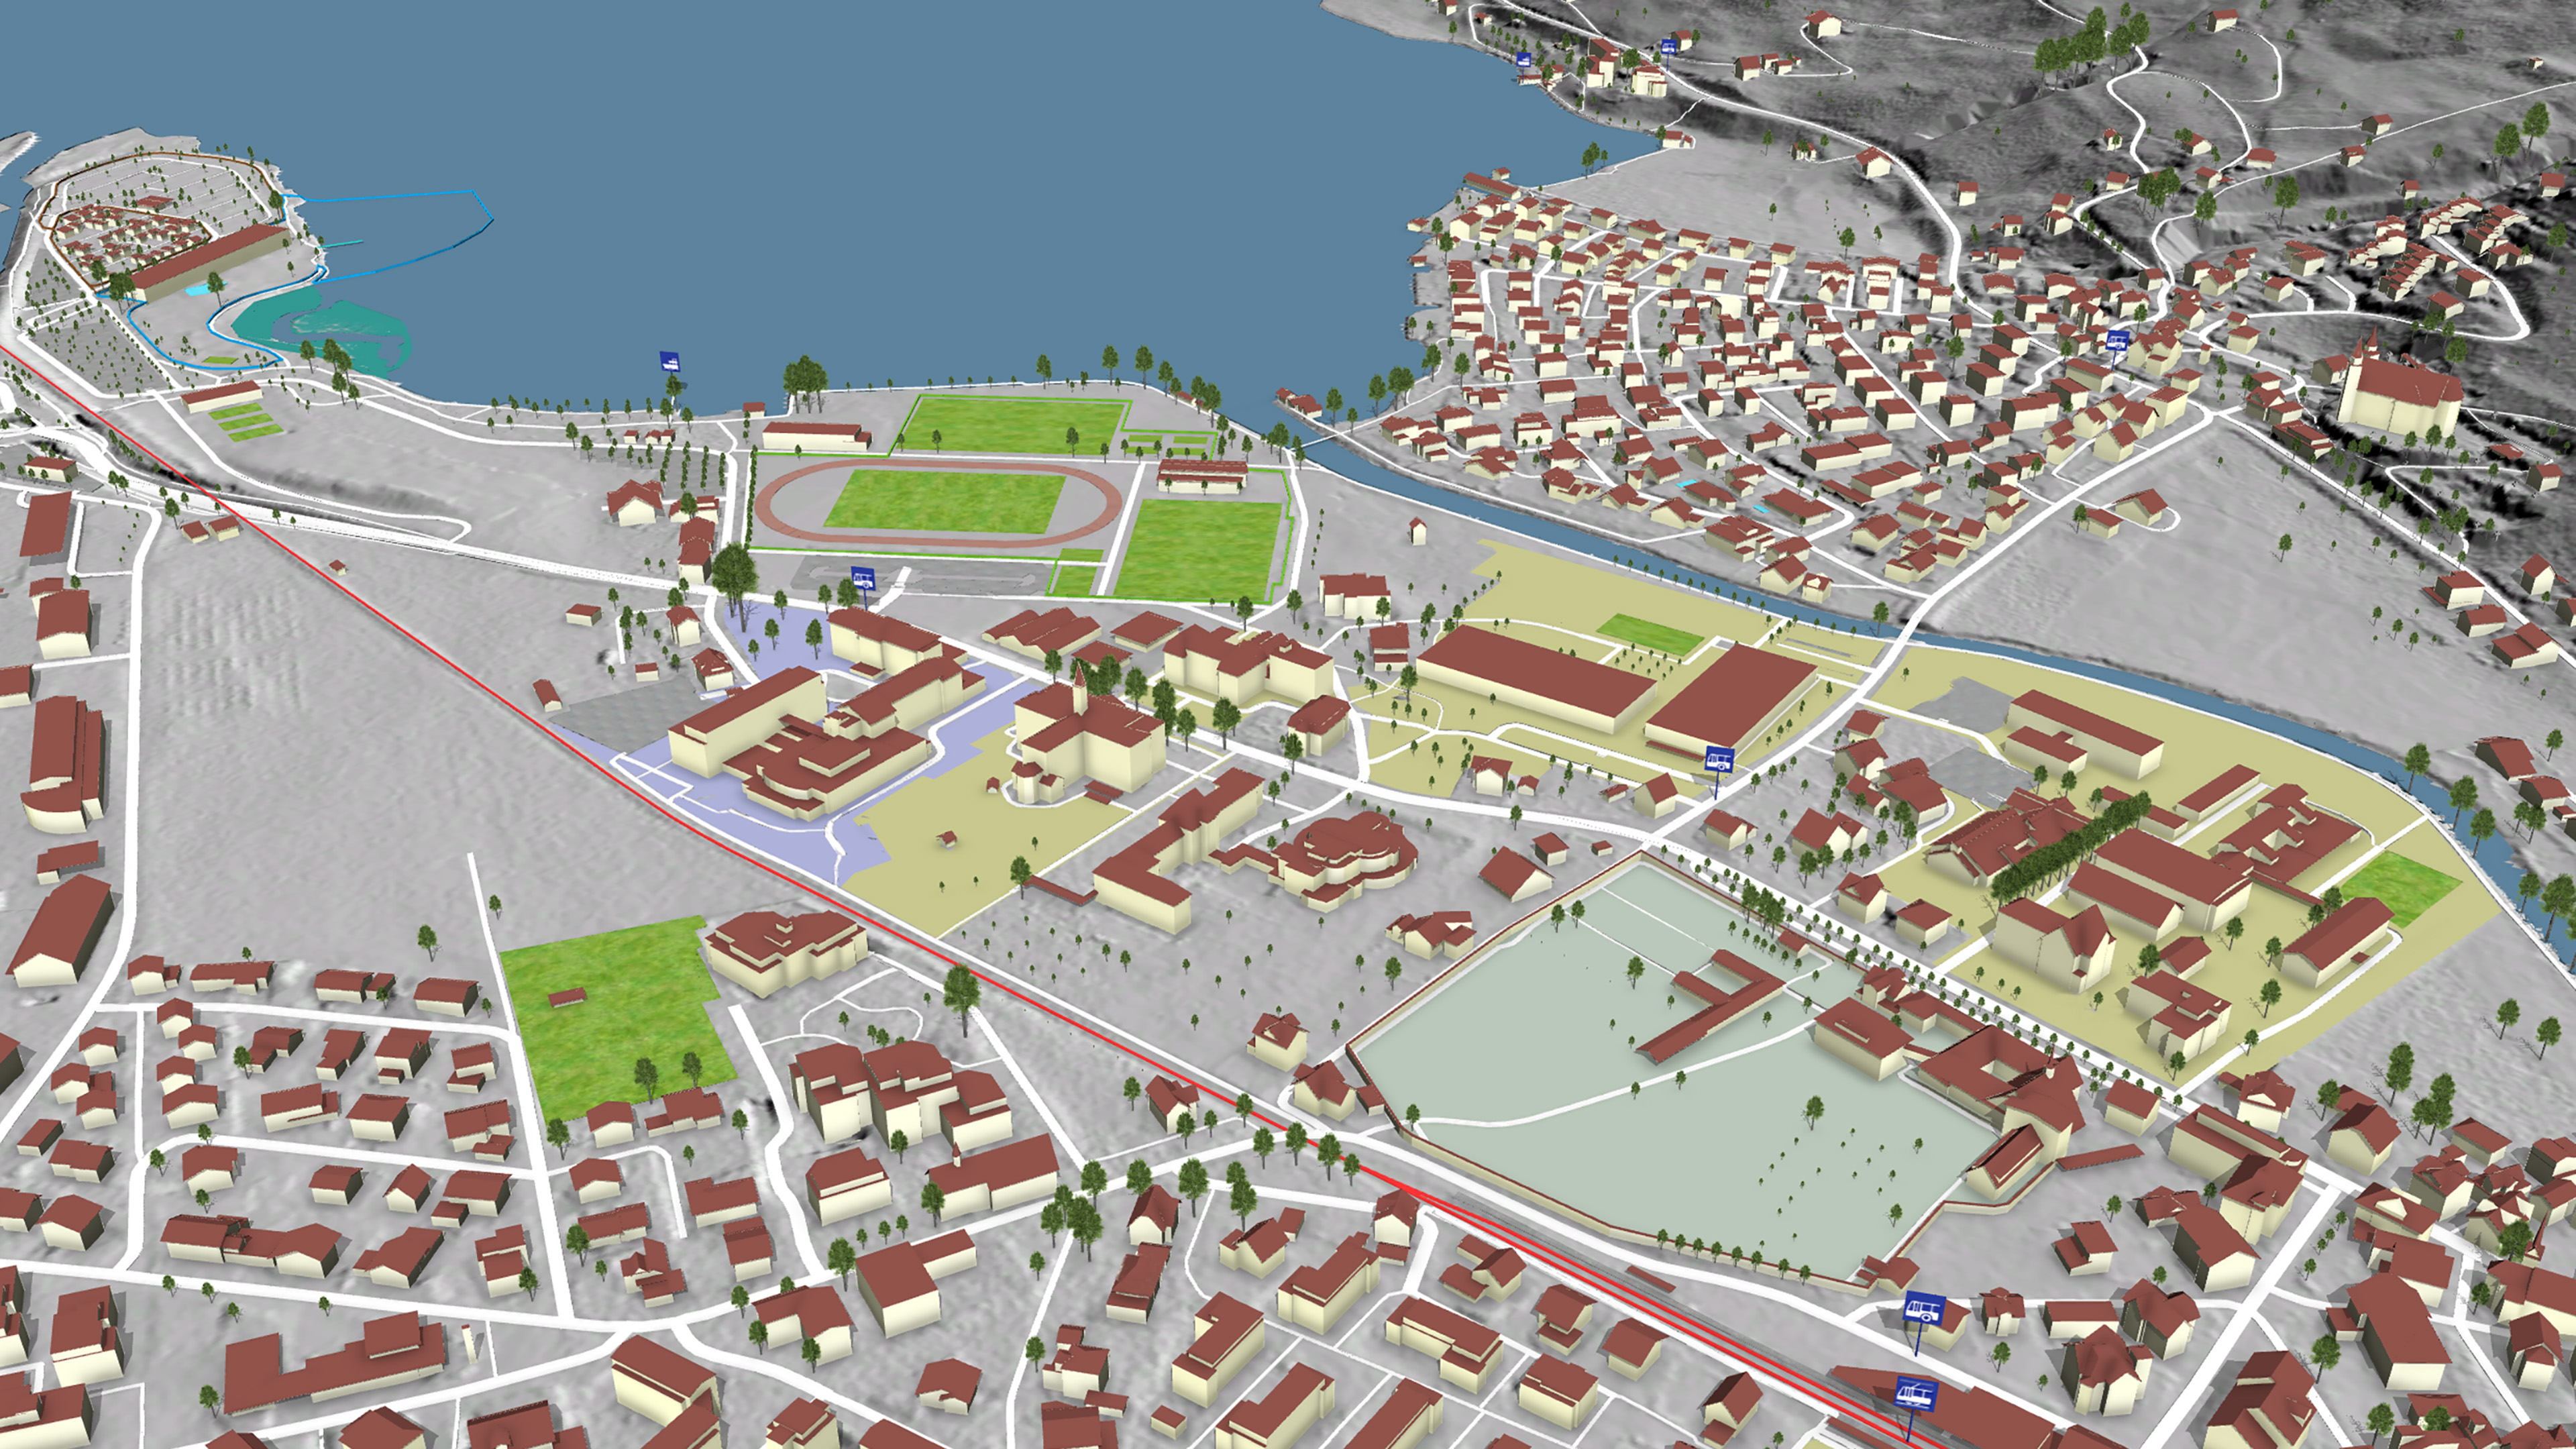 Virtual 3D landscape representation from a bird's eye view of a built-up area with a lake, created with data from the Topographic Landscape Model (TLM).